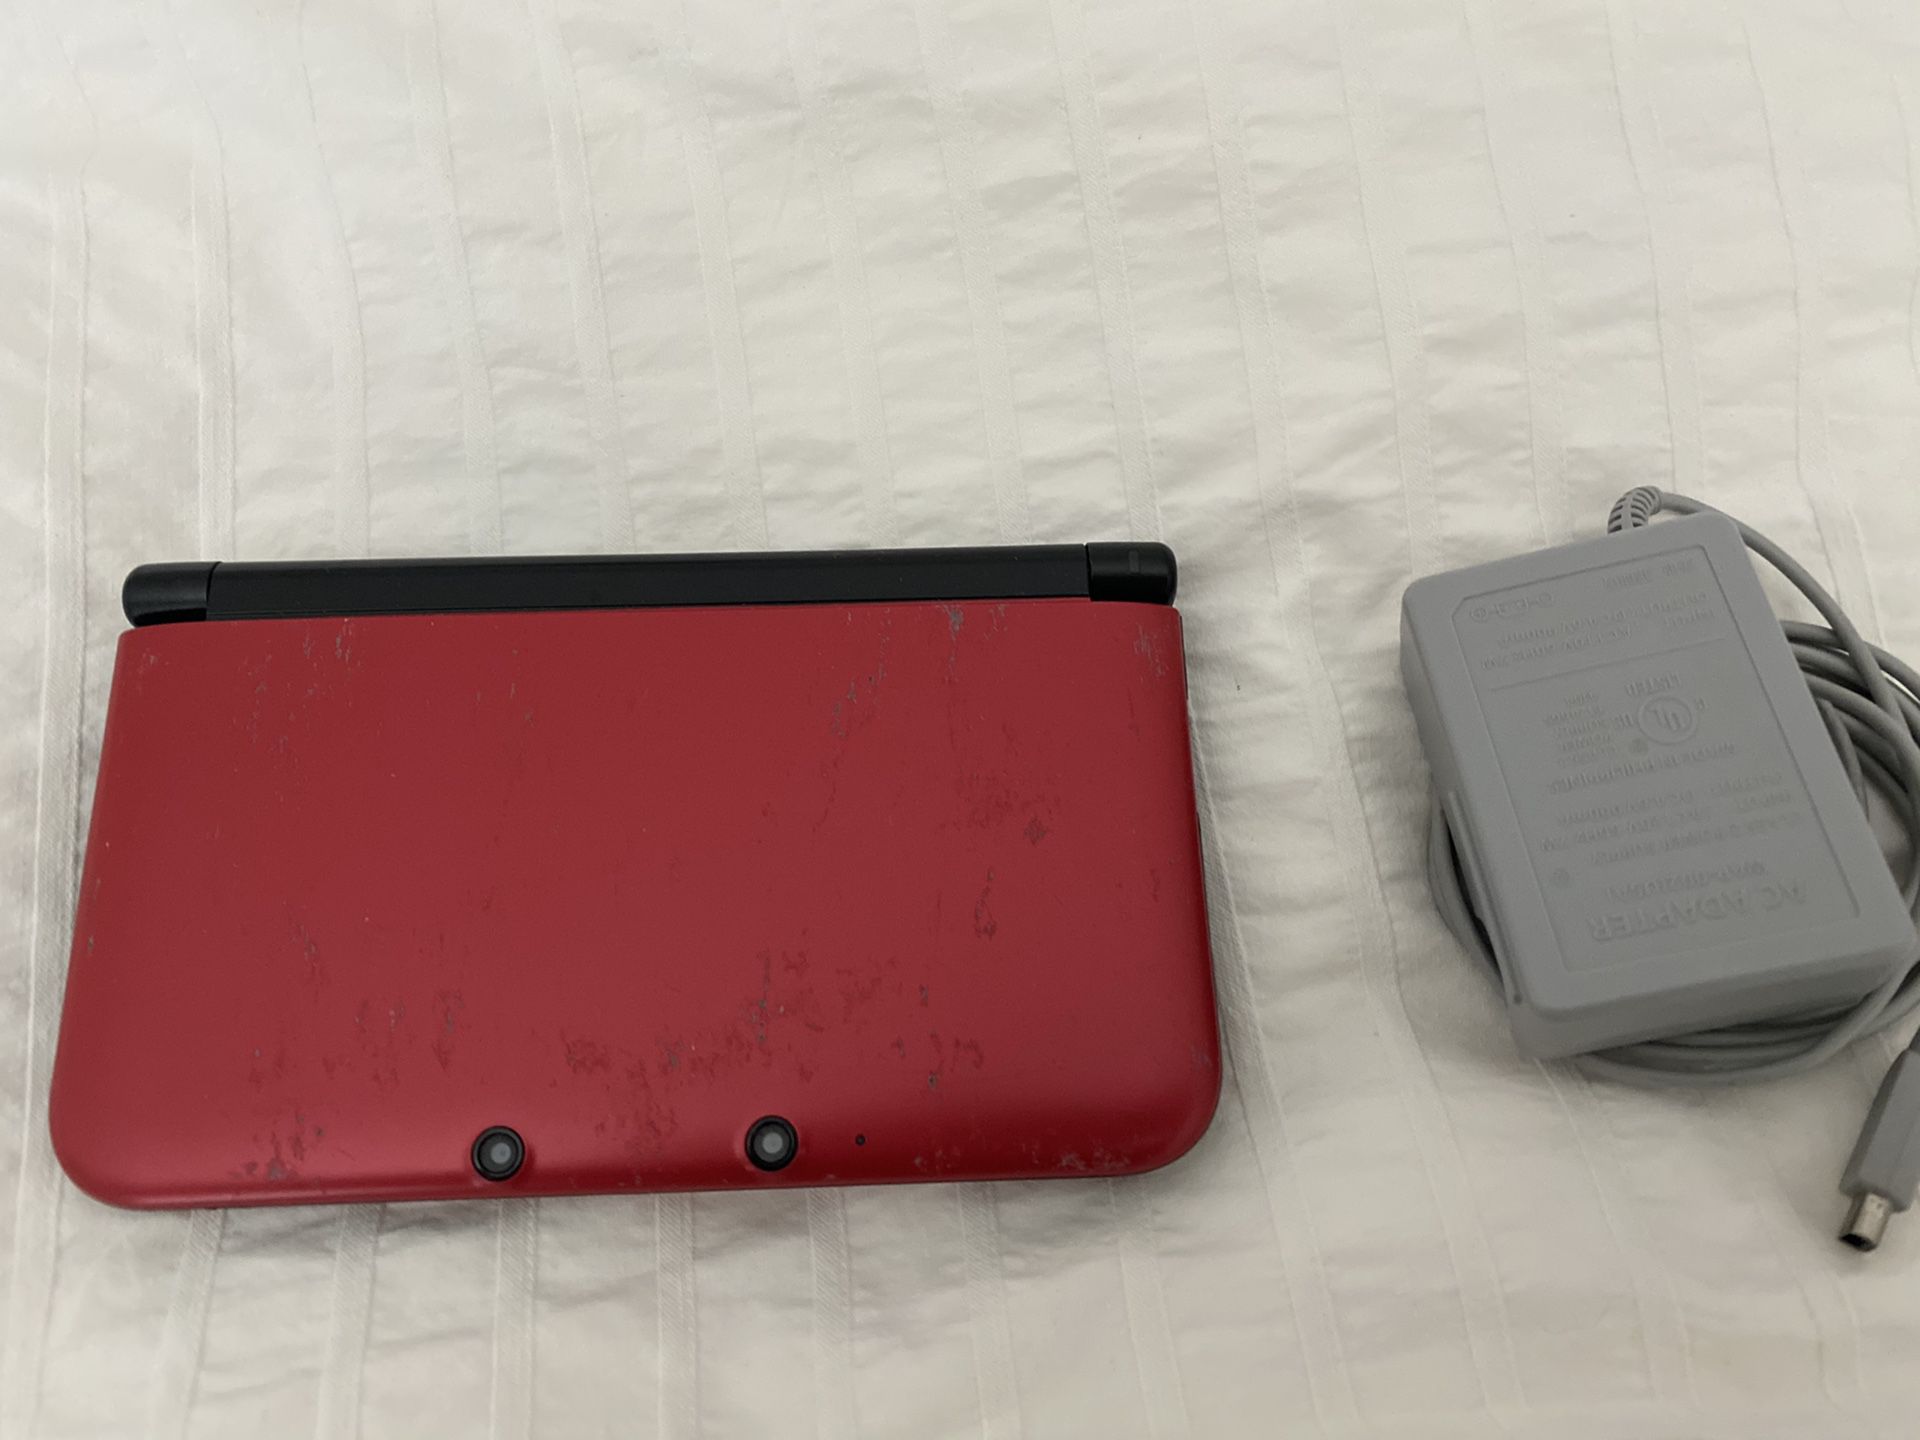 Nintendo 3DS XL red